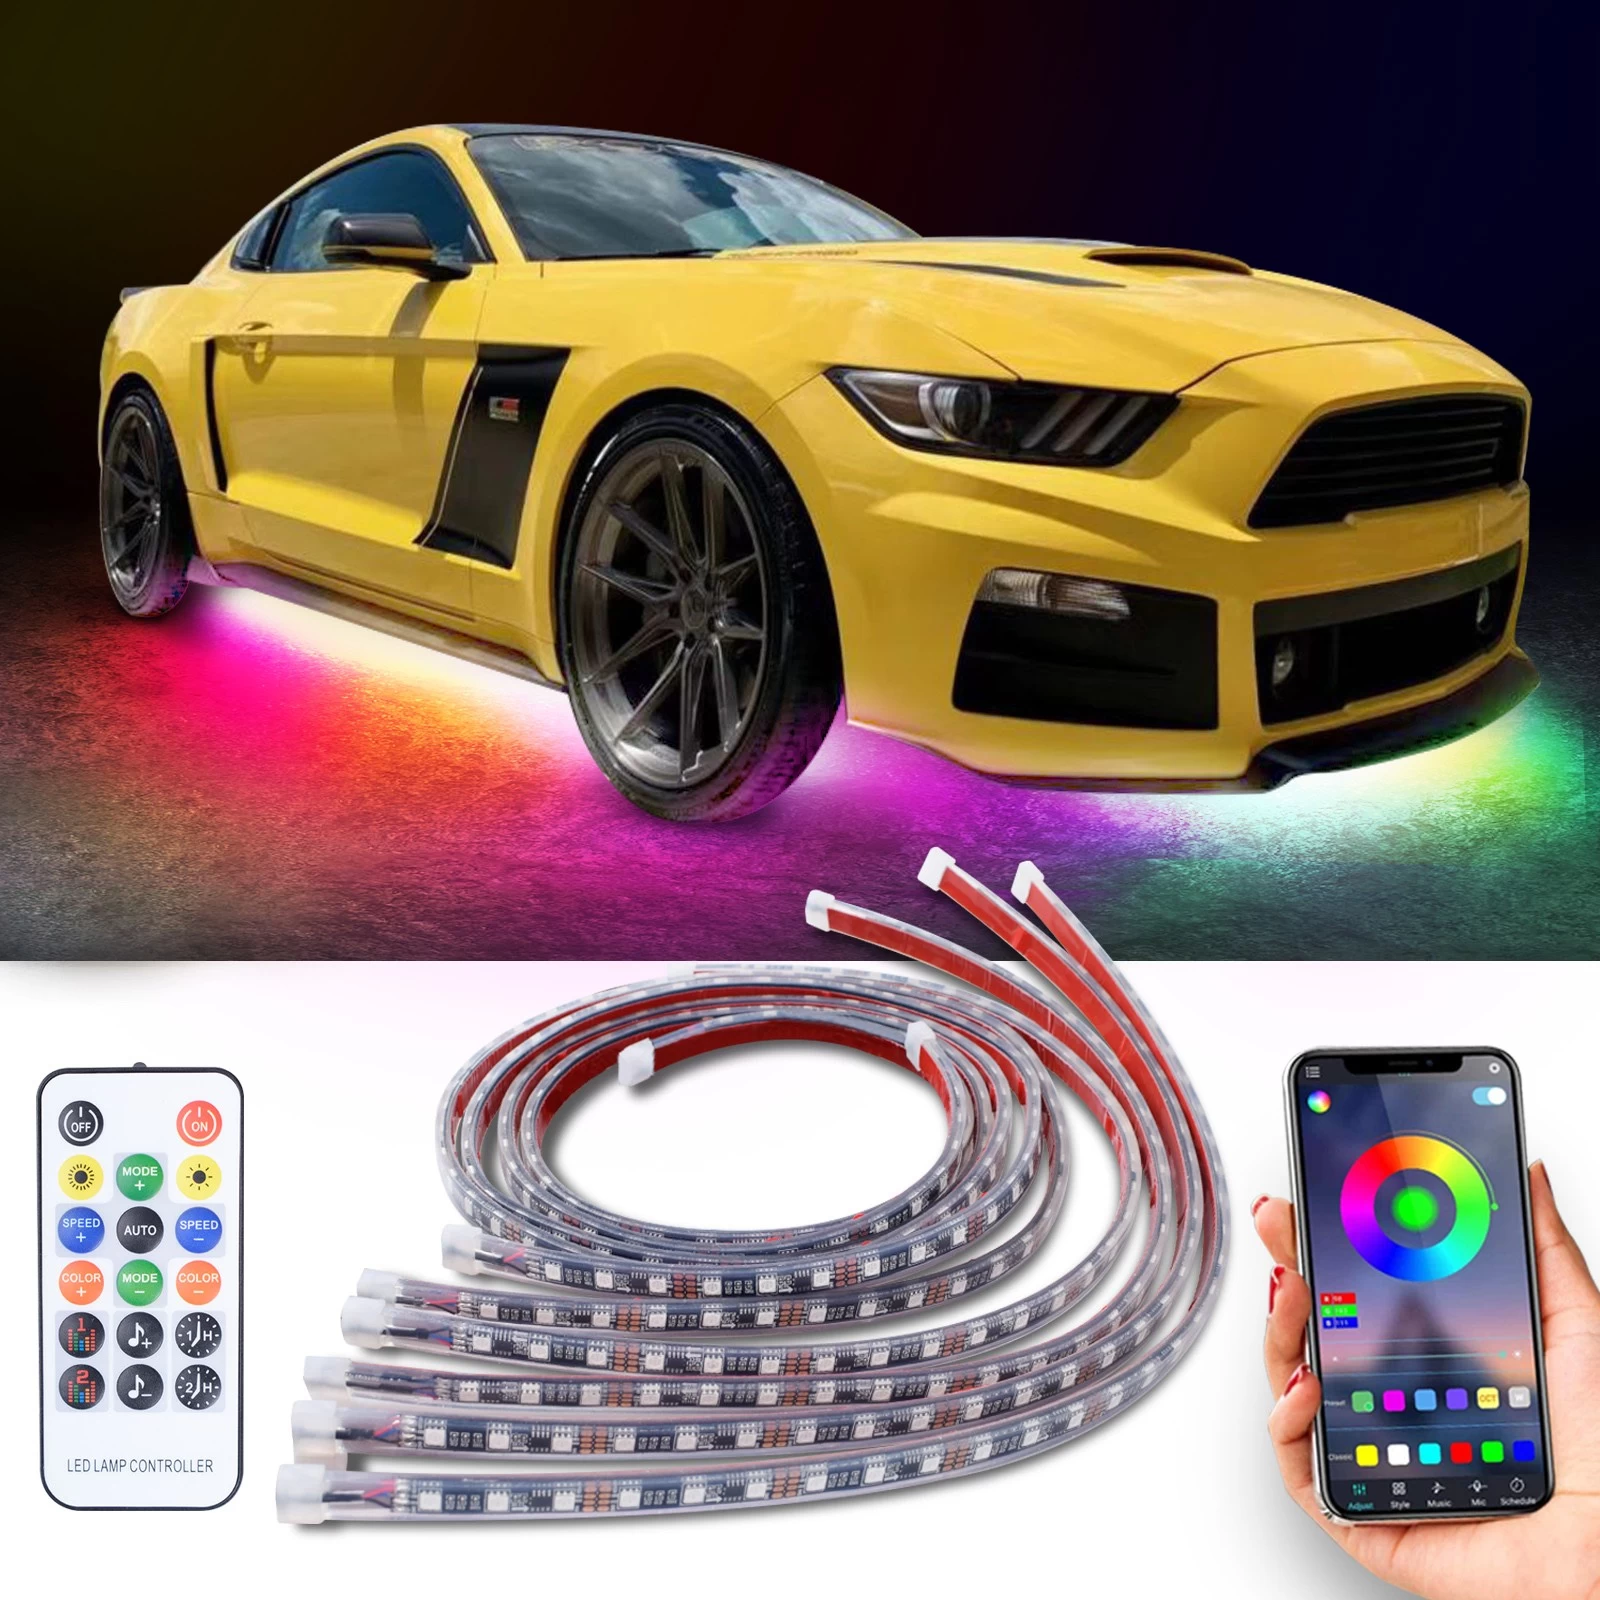 Unionlux Car Underglow Lights, 6 Pcs Bluetooth Led Strip Lights with Dream Color Chasing, APP Control 12V Underbody Lights, Waterproof Underglow Led Light Kit for Cars, Trucks, Boats